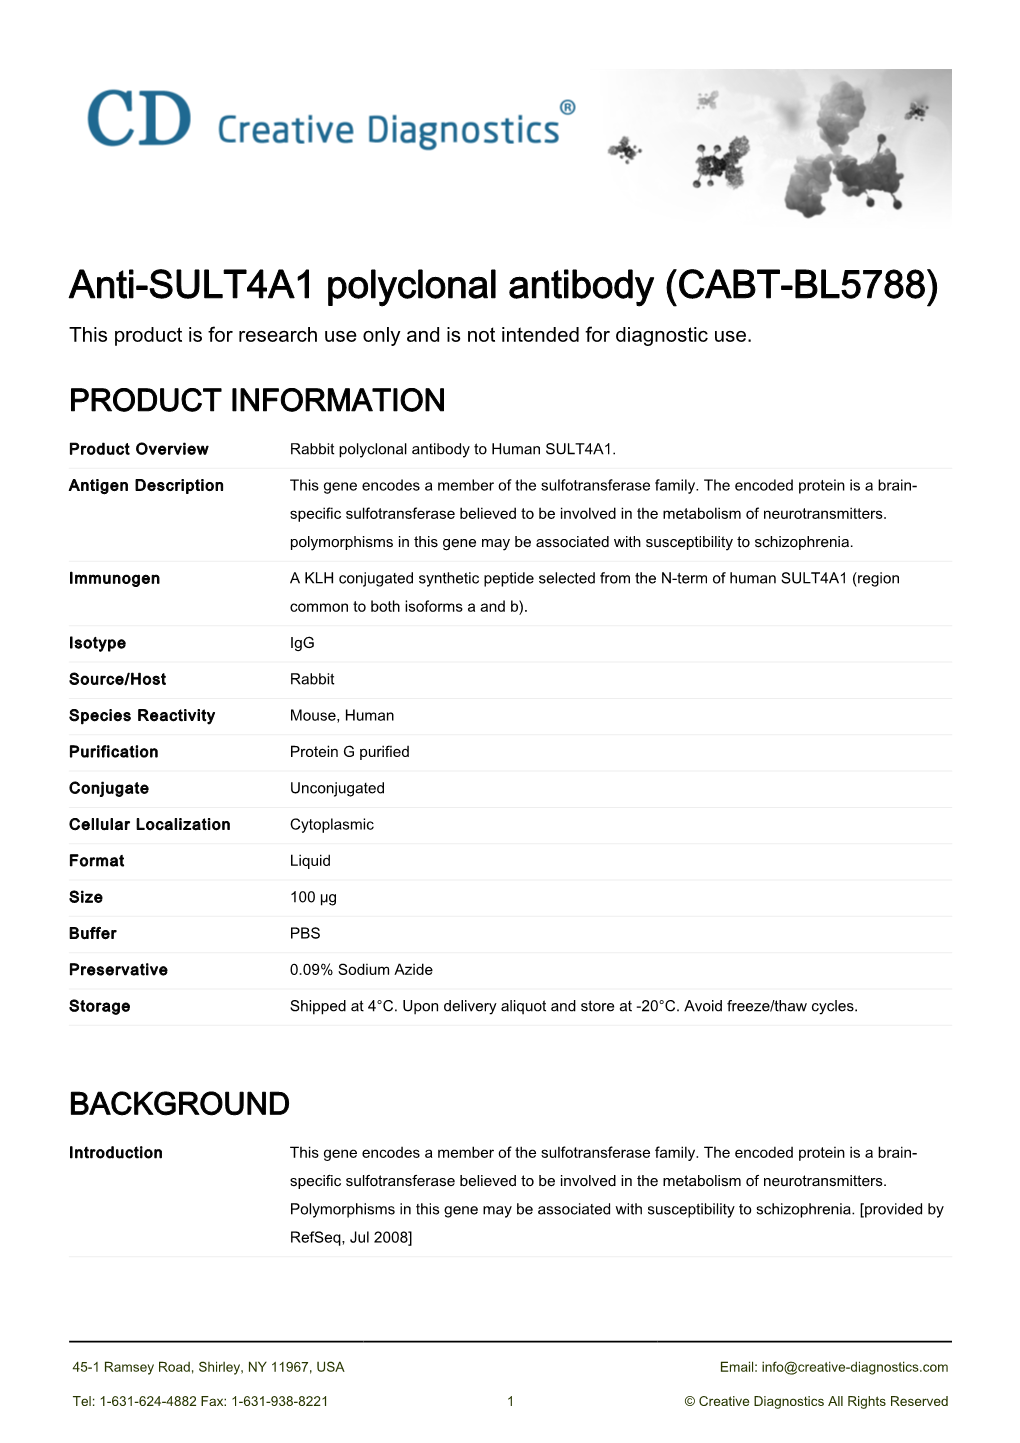 Anti-SULT4A1 Polyclonal Antibody (CABT-BL5788) This Product Is for Research Use Only and Is Not Intended for Diagnostic Use